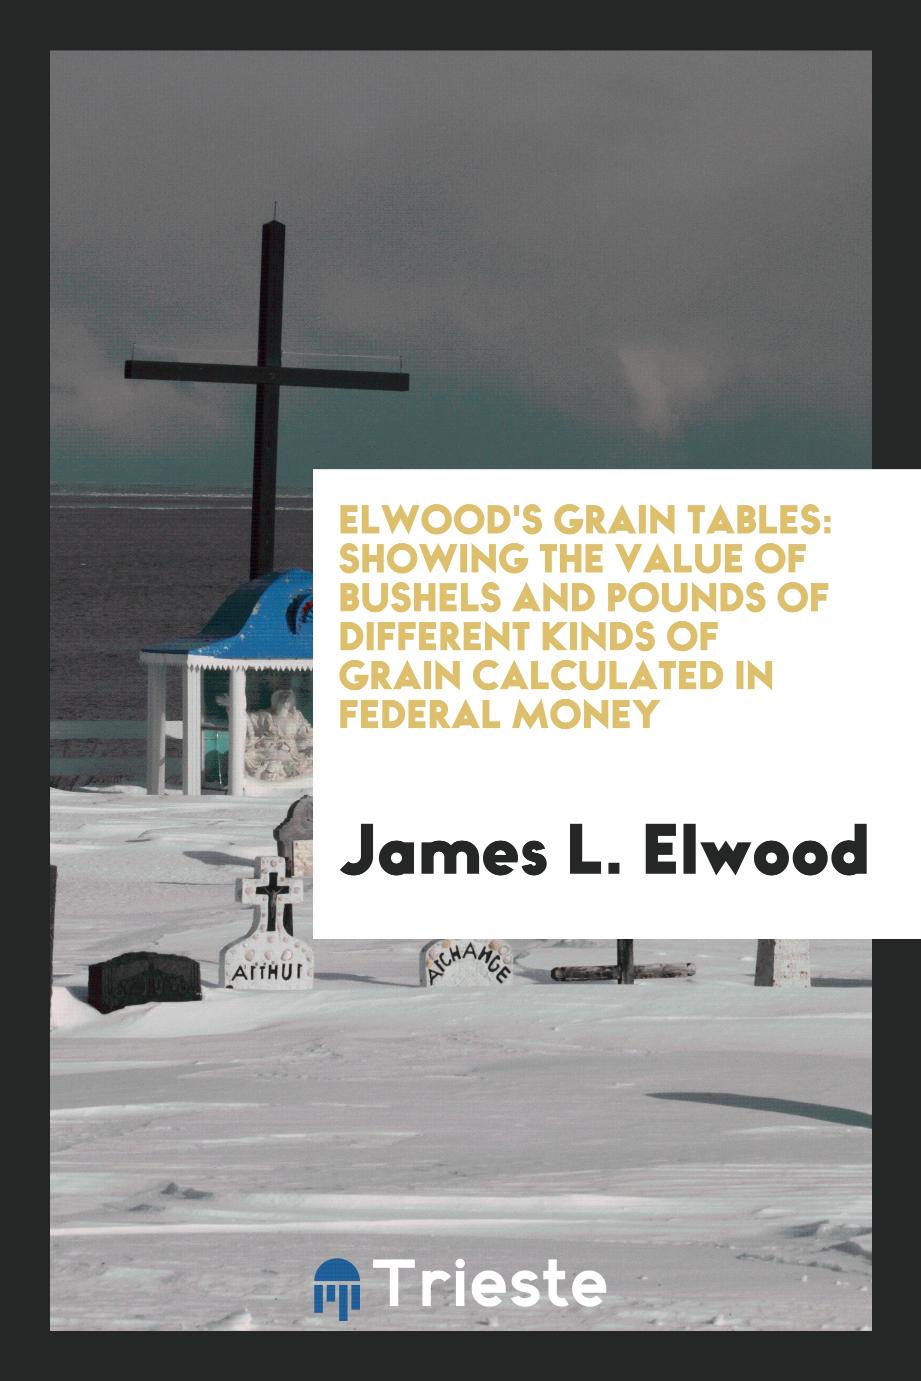 Elwood's grain tables: showing the value of bushels and pounds of different kinds of grain calculated in federal money